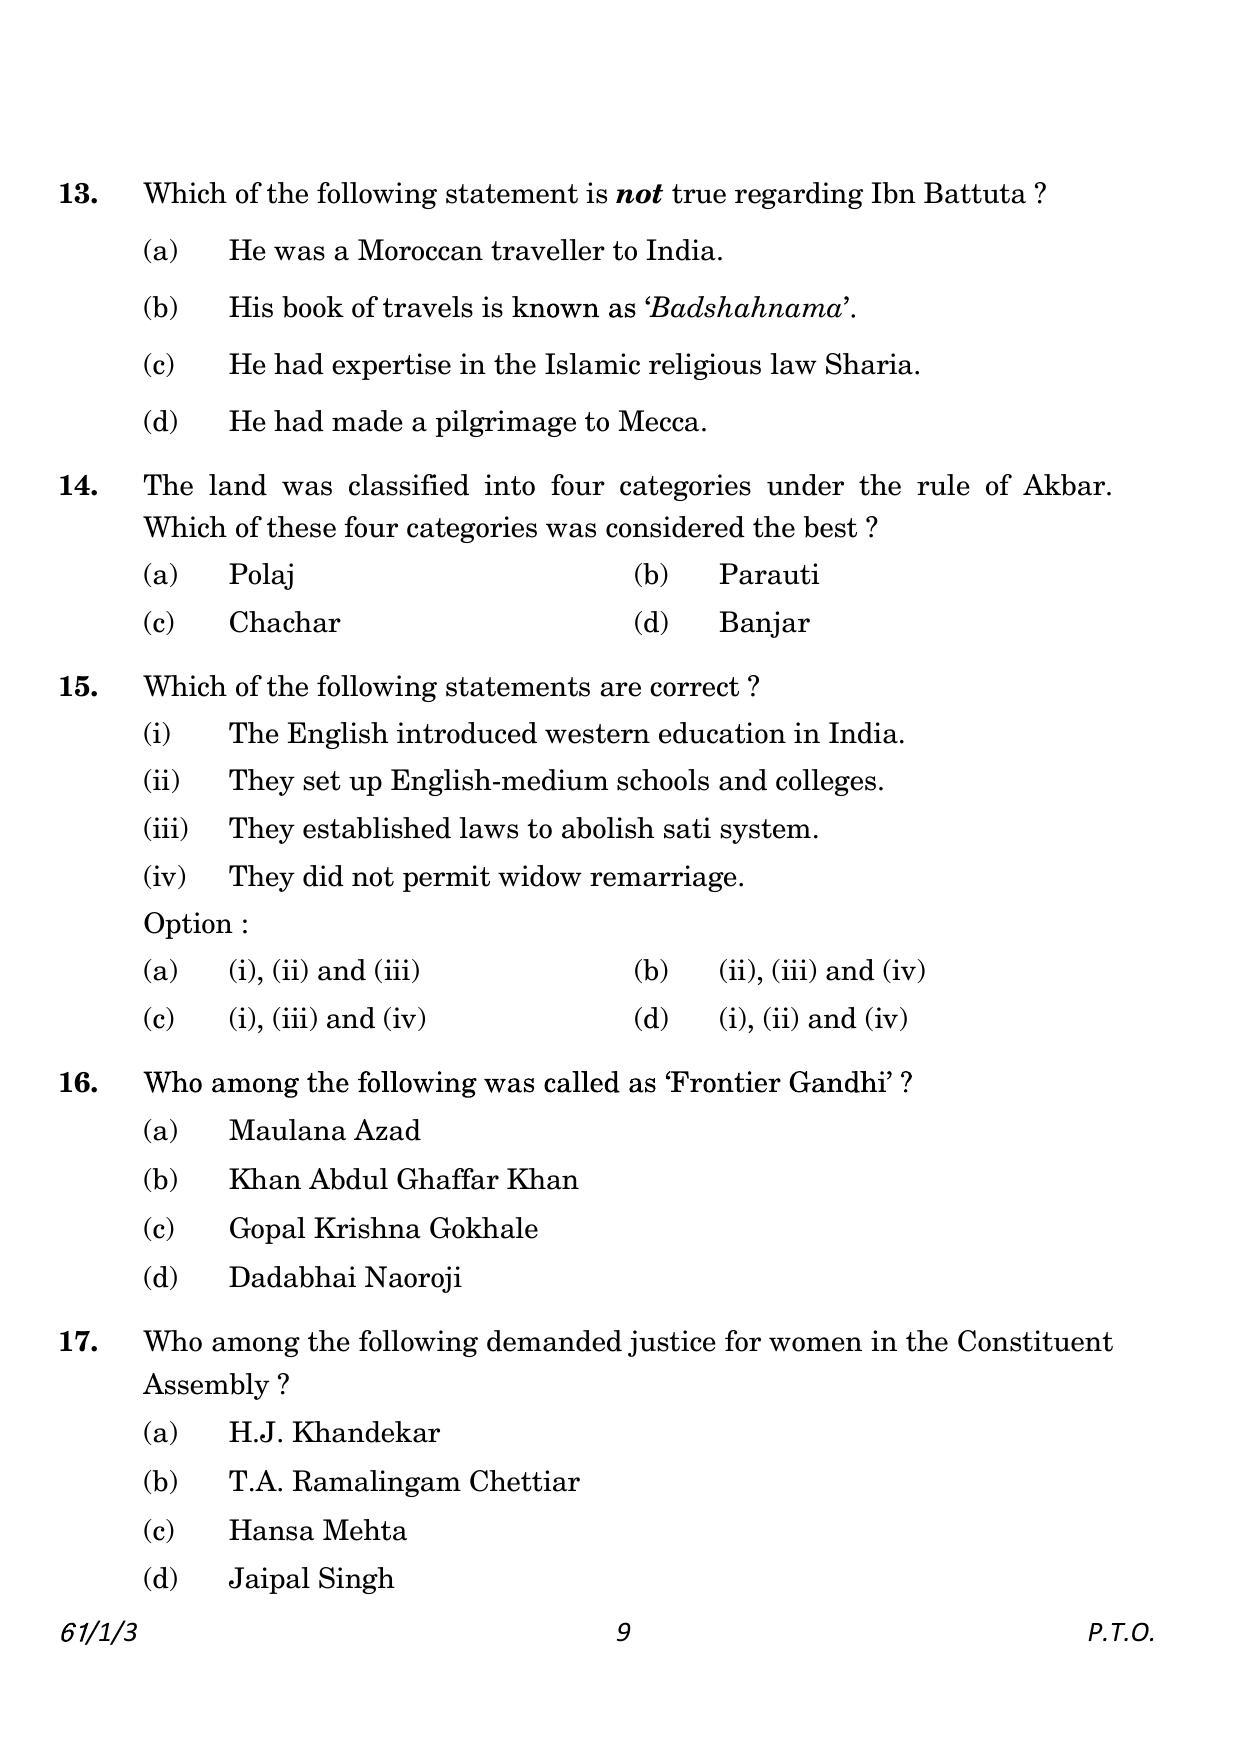 CBSE Class 12 61-1-3 History 2023 Question Paper - Page 9